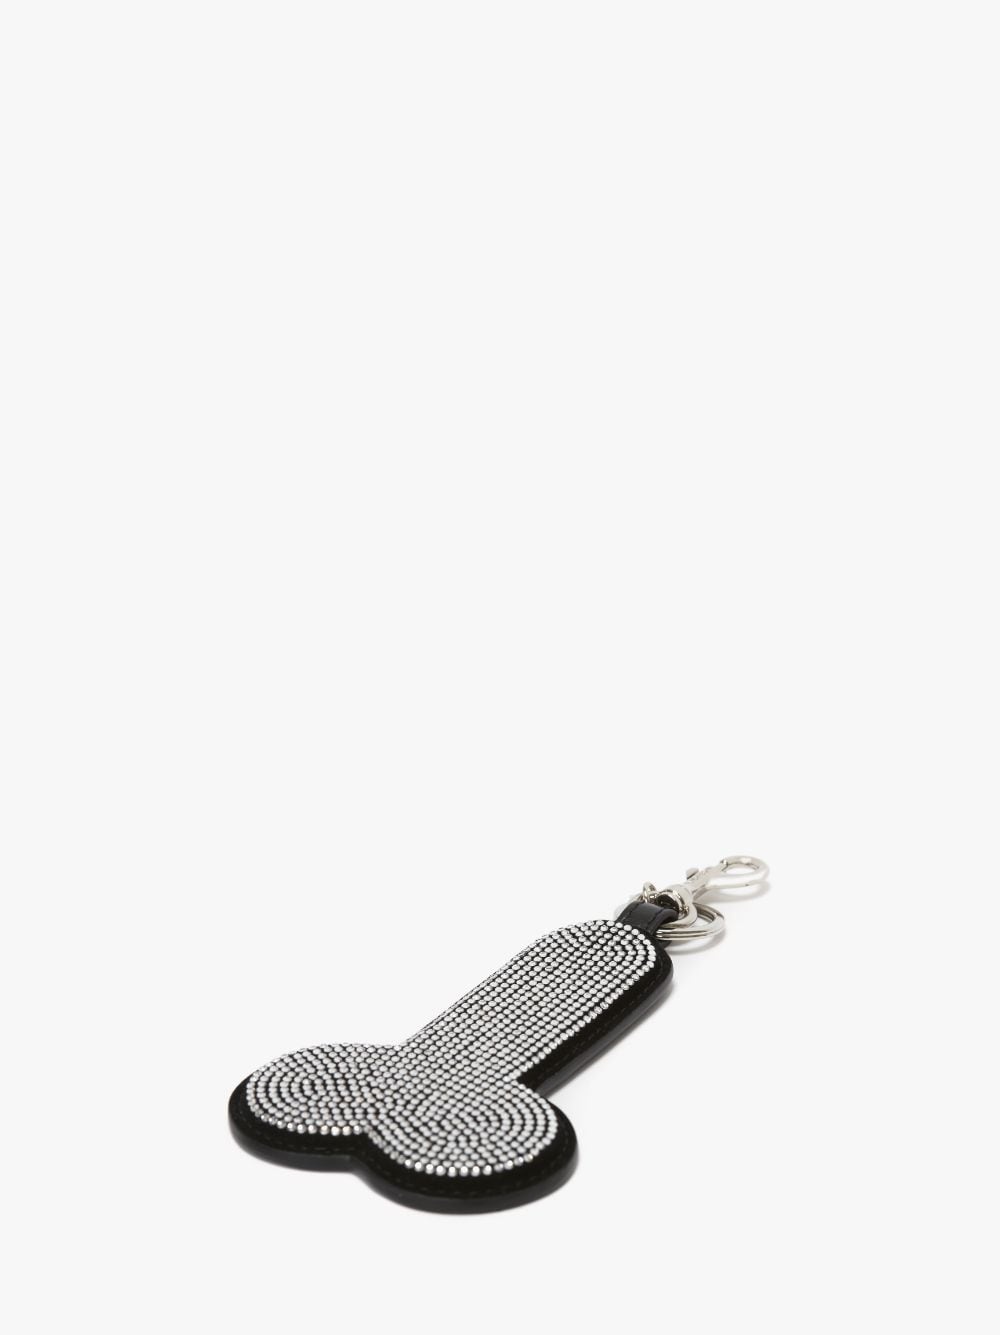 SUEDE PENIS KEYRING WITH CRYSTALS - 3